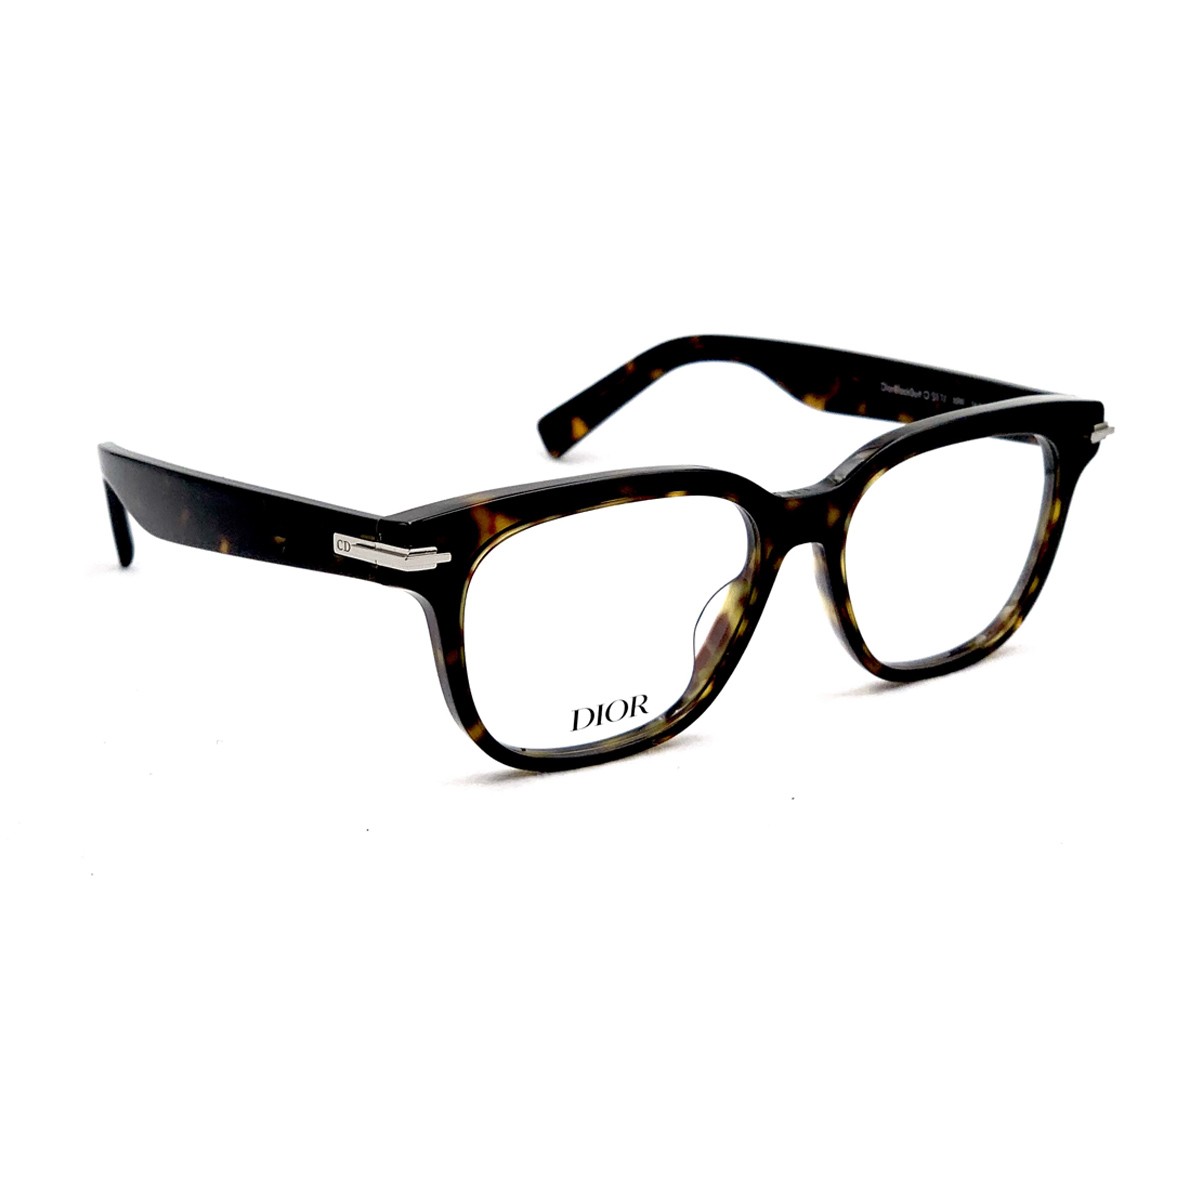 Christian Dior model 2722 Color 30 Retro Vintage glasses very high quality  and elegant with spring hinges for superior comfort and a discreet temple  pattern  GrauGlasses vintage eyewear